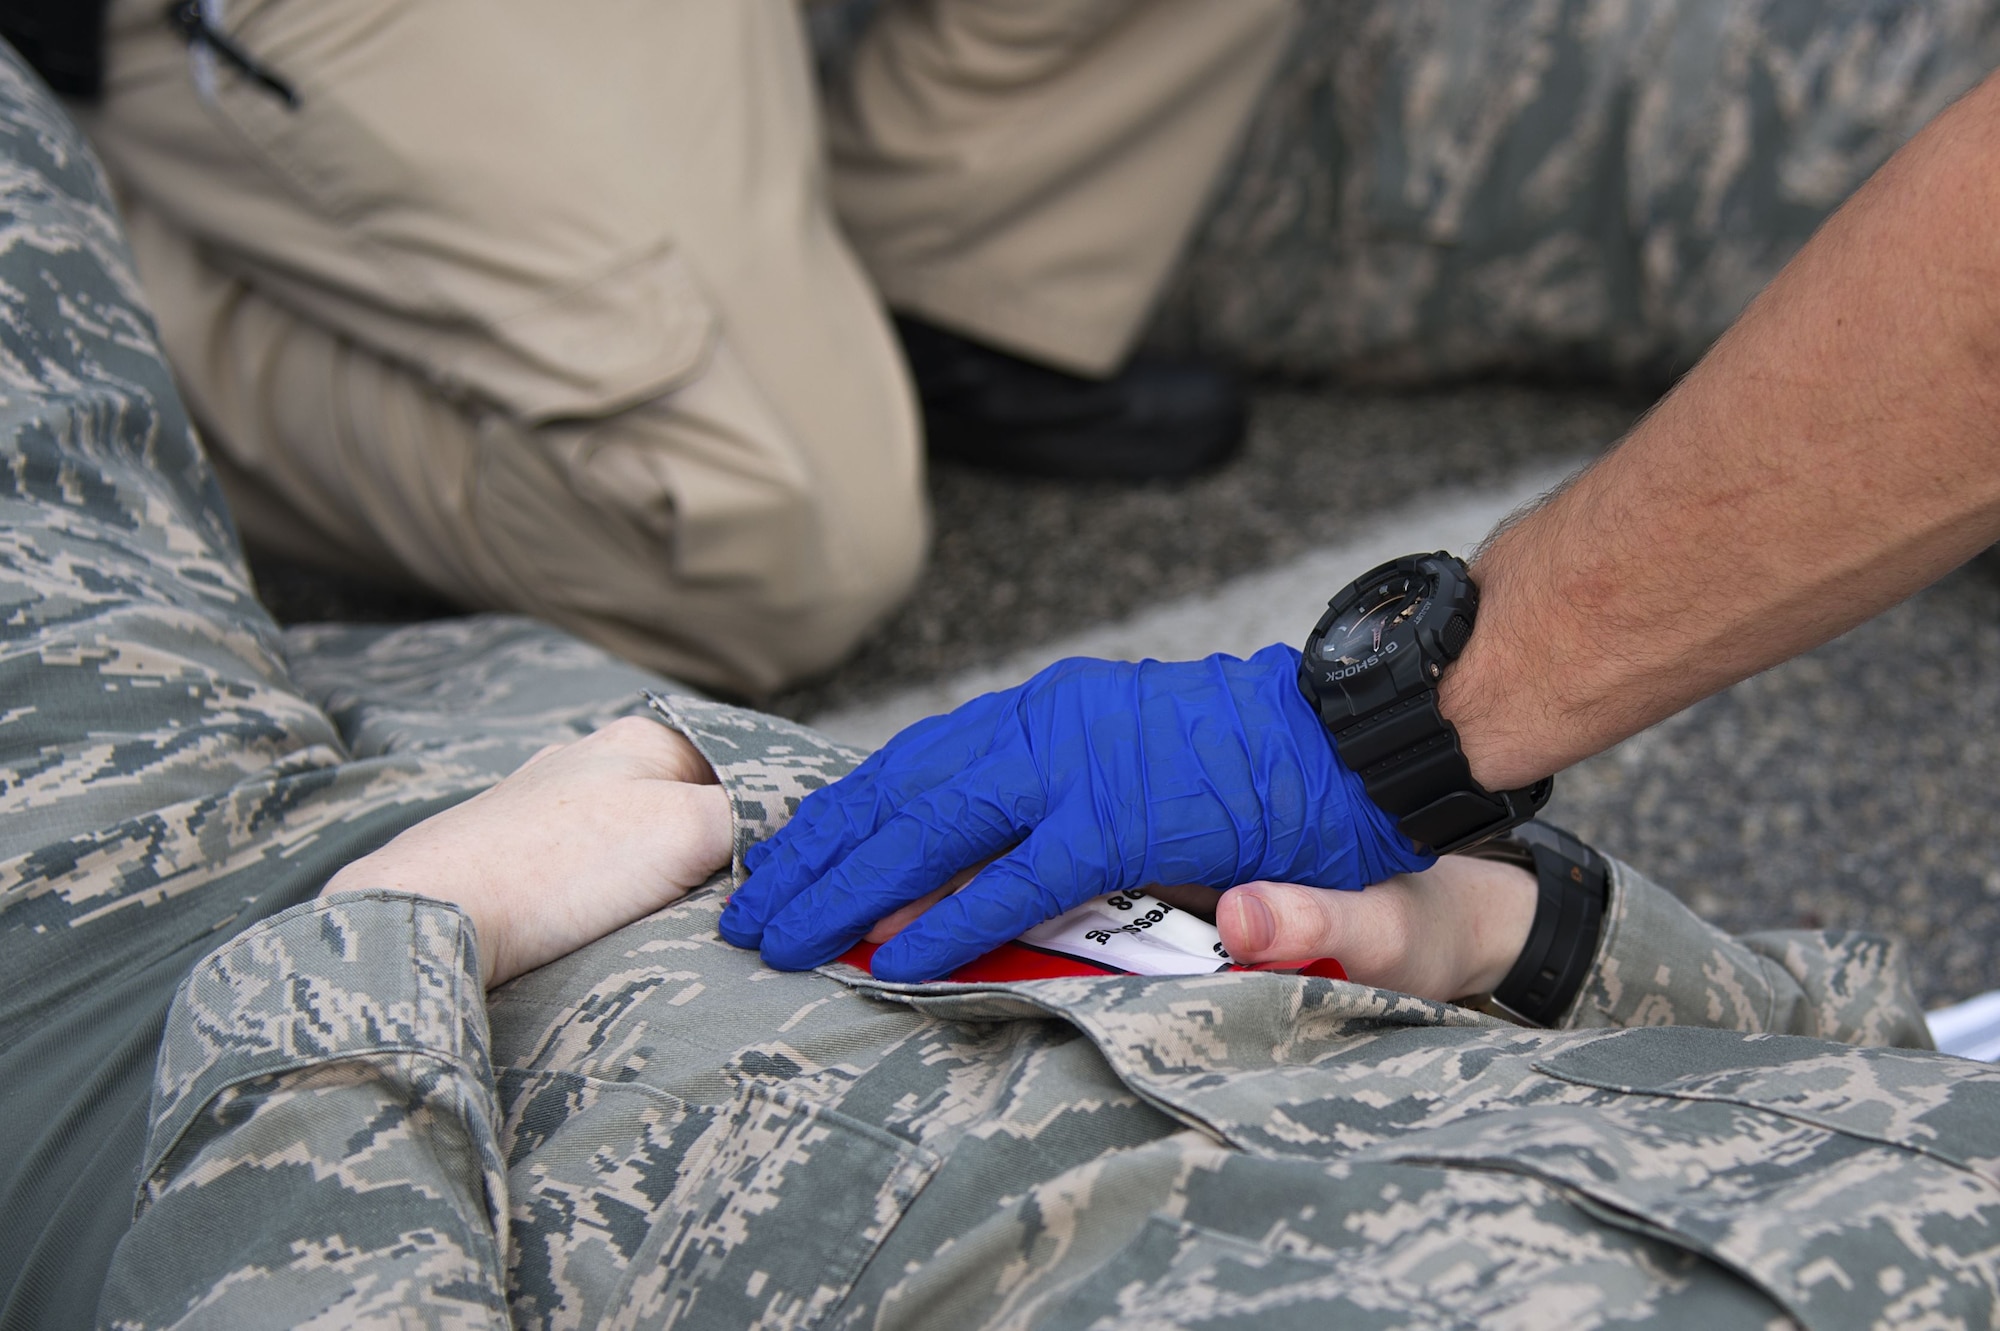 U.S. Air Force Staff Sgt. Stephanie Wilburn, a flight attendant assigned to the 310th Airlift Squadron, receives applied pressure to a simulated gunshot wound to the abdomen during an active shooter exercise at MacDill Air Force Base, Fla., Jan. 9, 2017. First responders trained on critical response tactics in case of an active shooter.